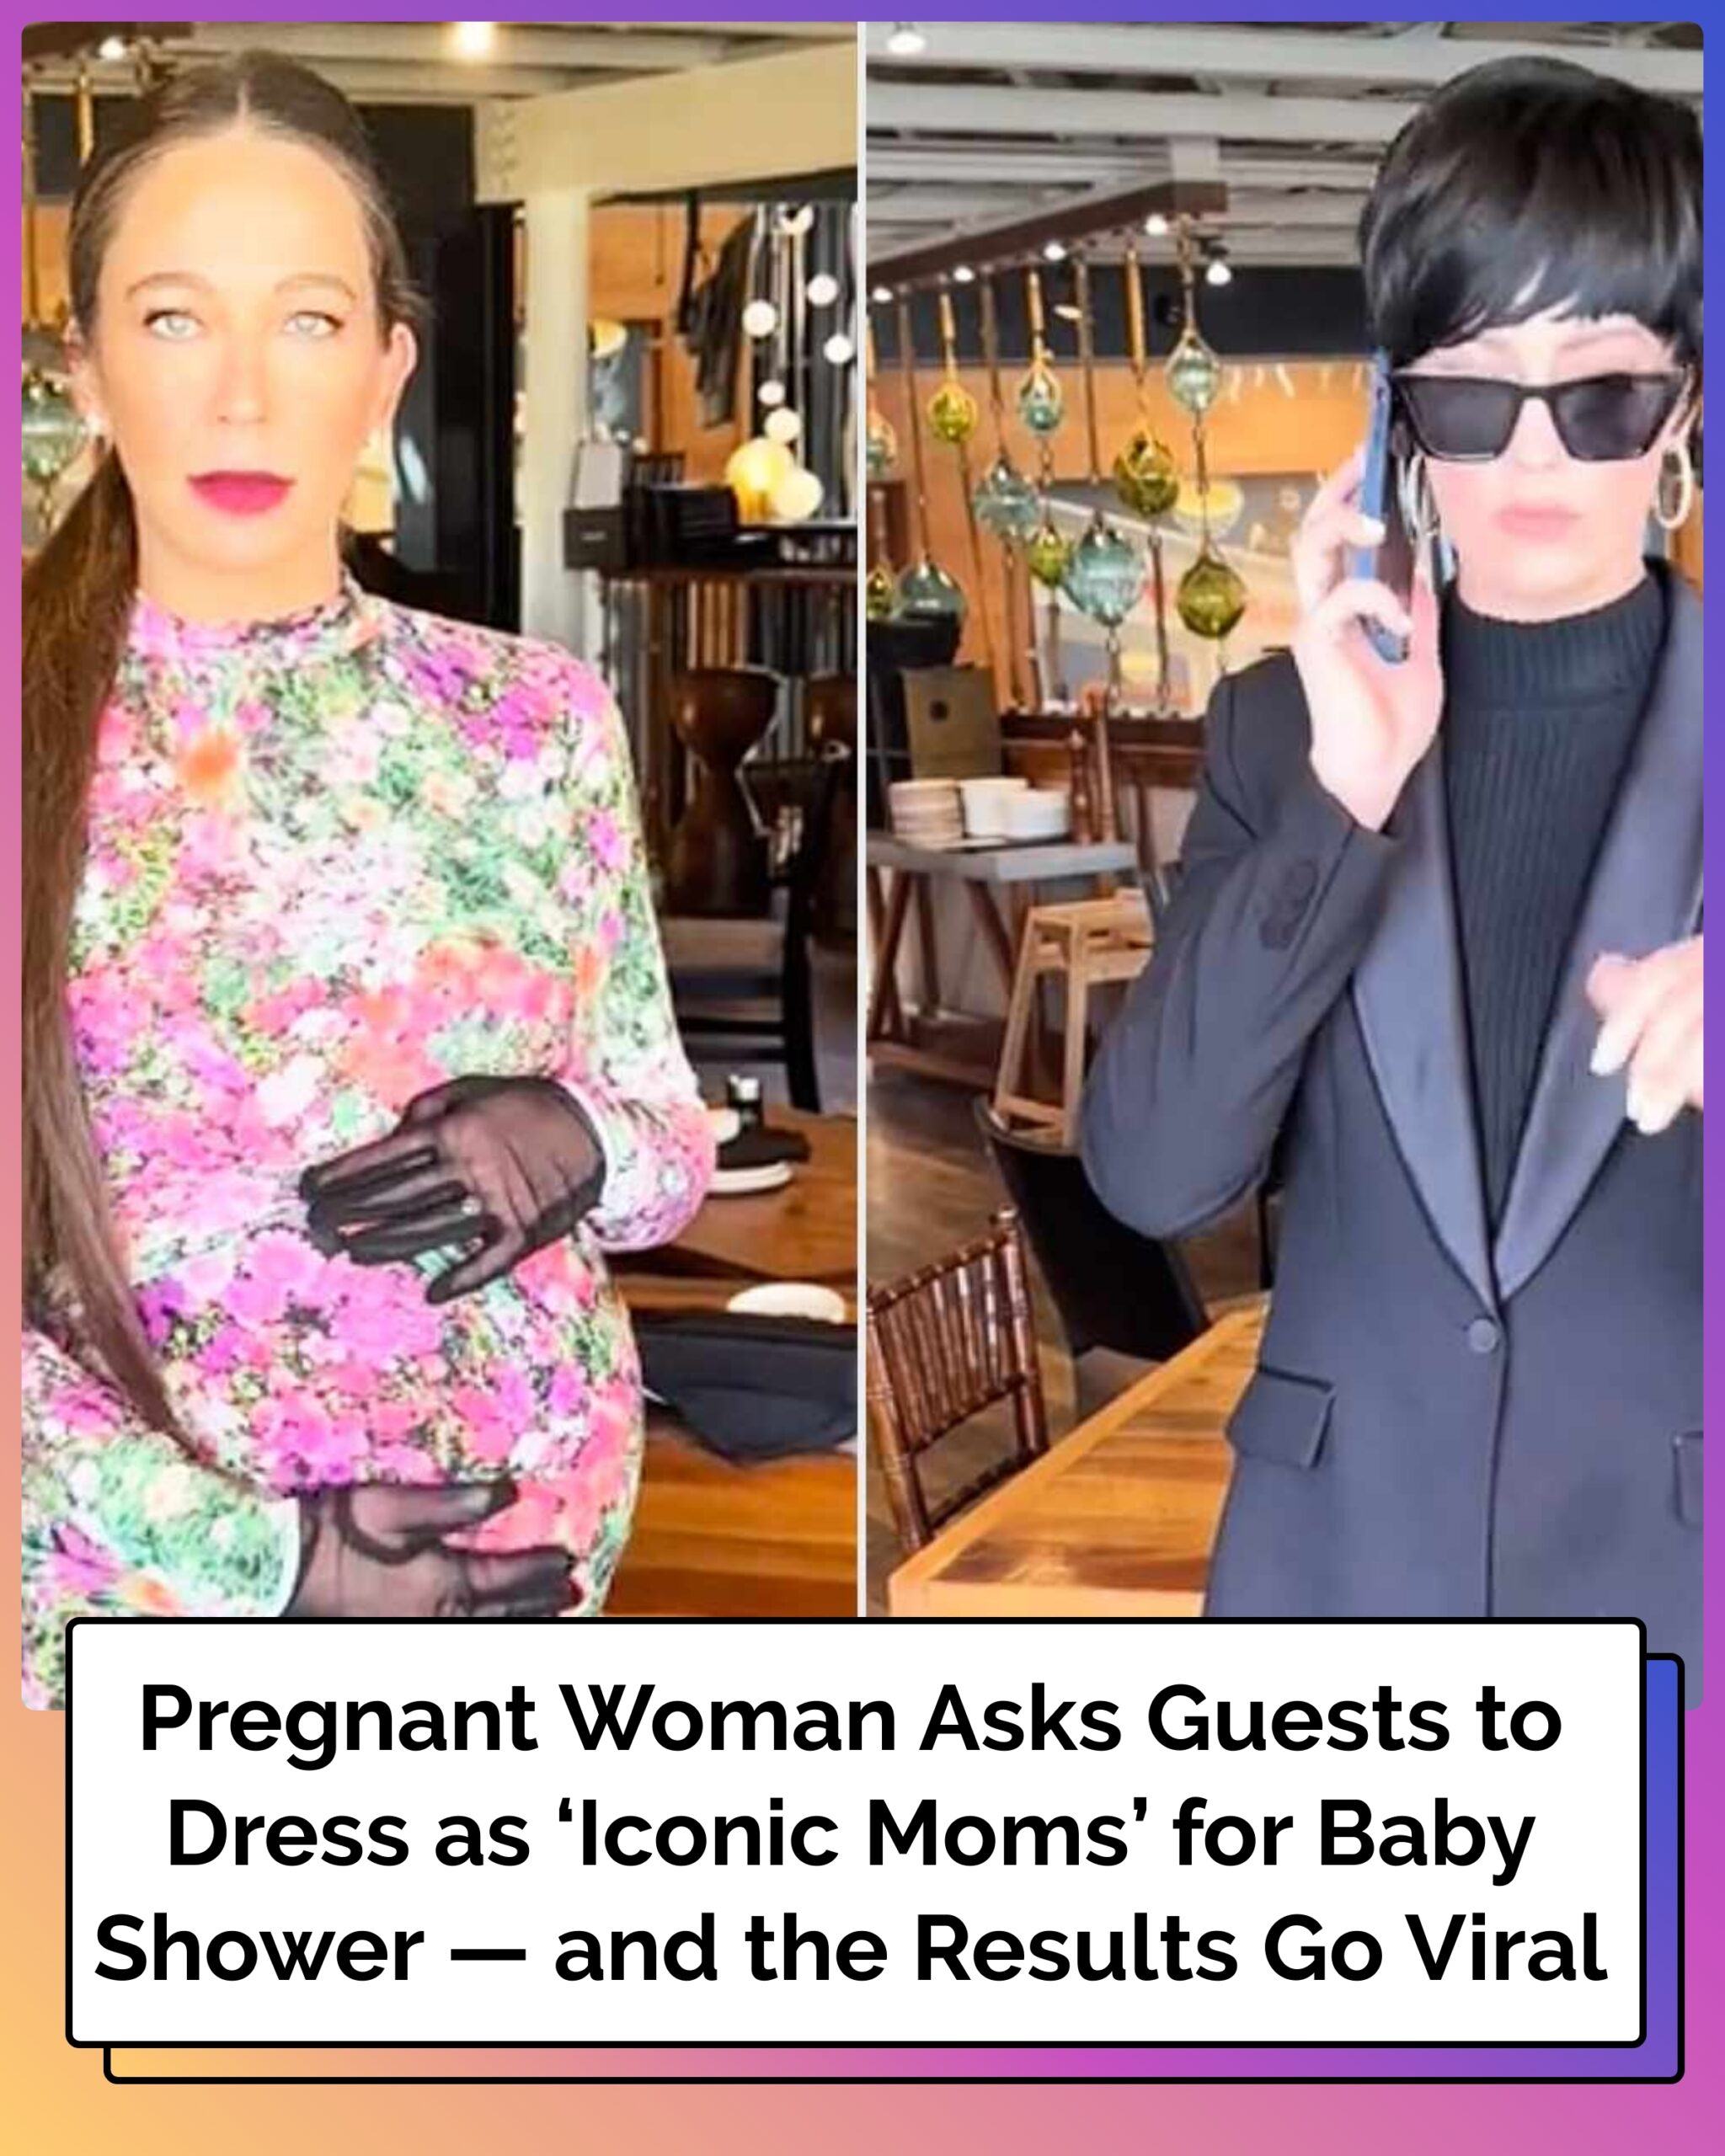 Pregnant Woman Asks Guests to Dress as ‘Iconic Moms’ for Baby Shower — and the Results Go Viral